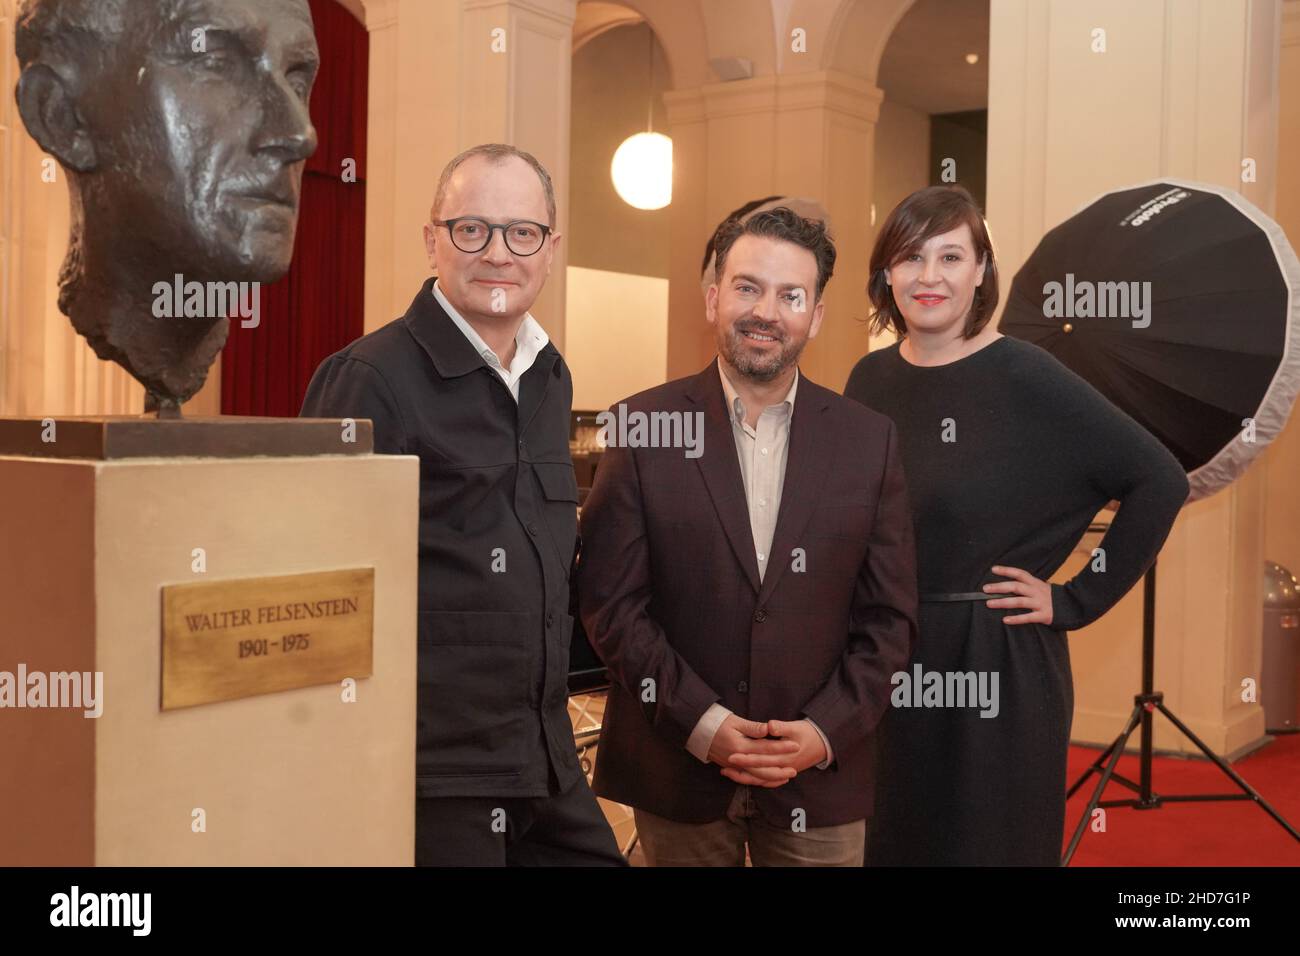 04 January 2022, Berlin: Philip Bröking (l), Opera Director and designated Co-Director, and Susanne Moser (r), Executive Director and designated Co-Director, introduce James Gaffigan as the new General Music Director of the Komische Oper. Gaffigan will assume his new role at the beginning of the 2023/24 season. Photo: Jörg Carstensen/dpa Stock Photo